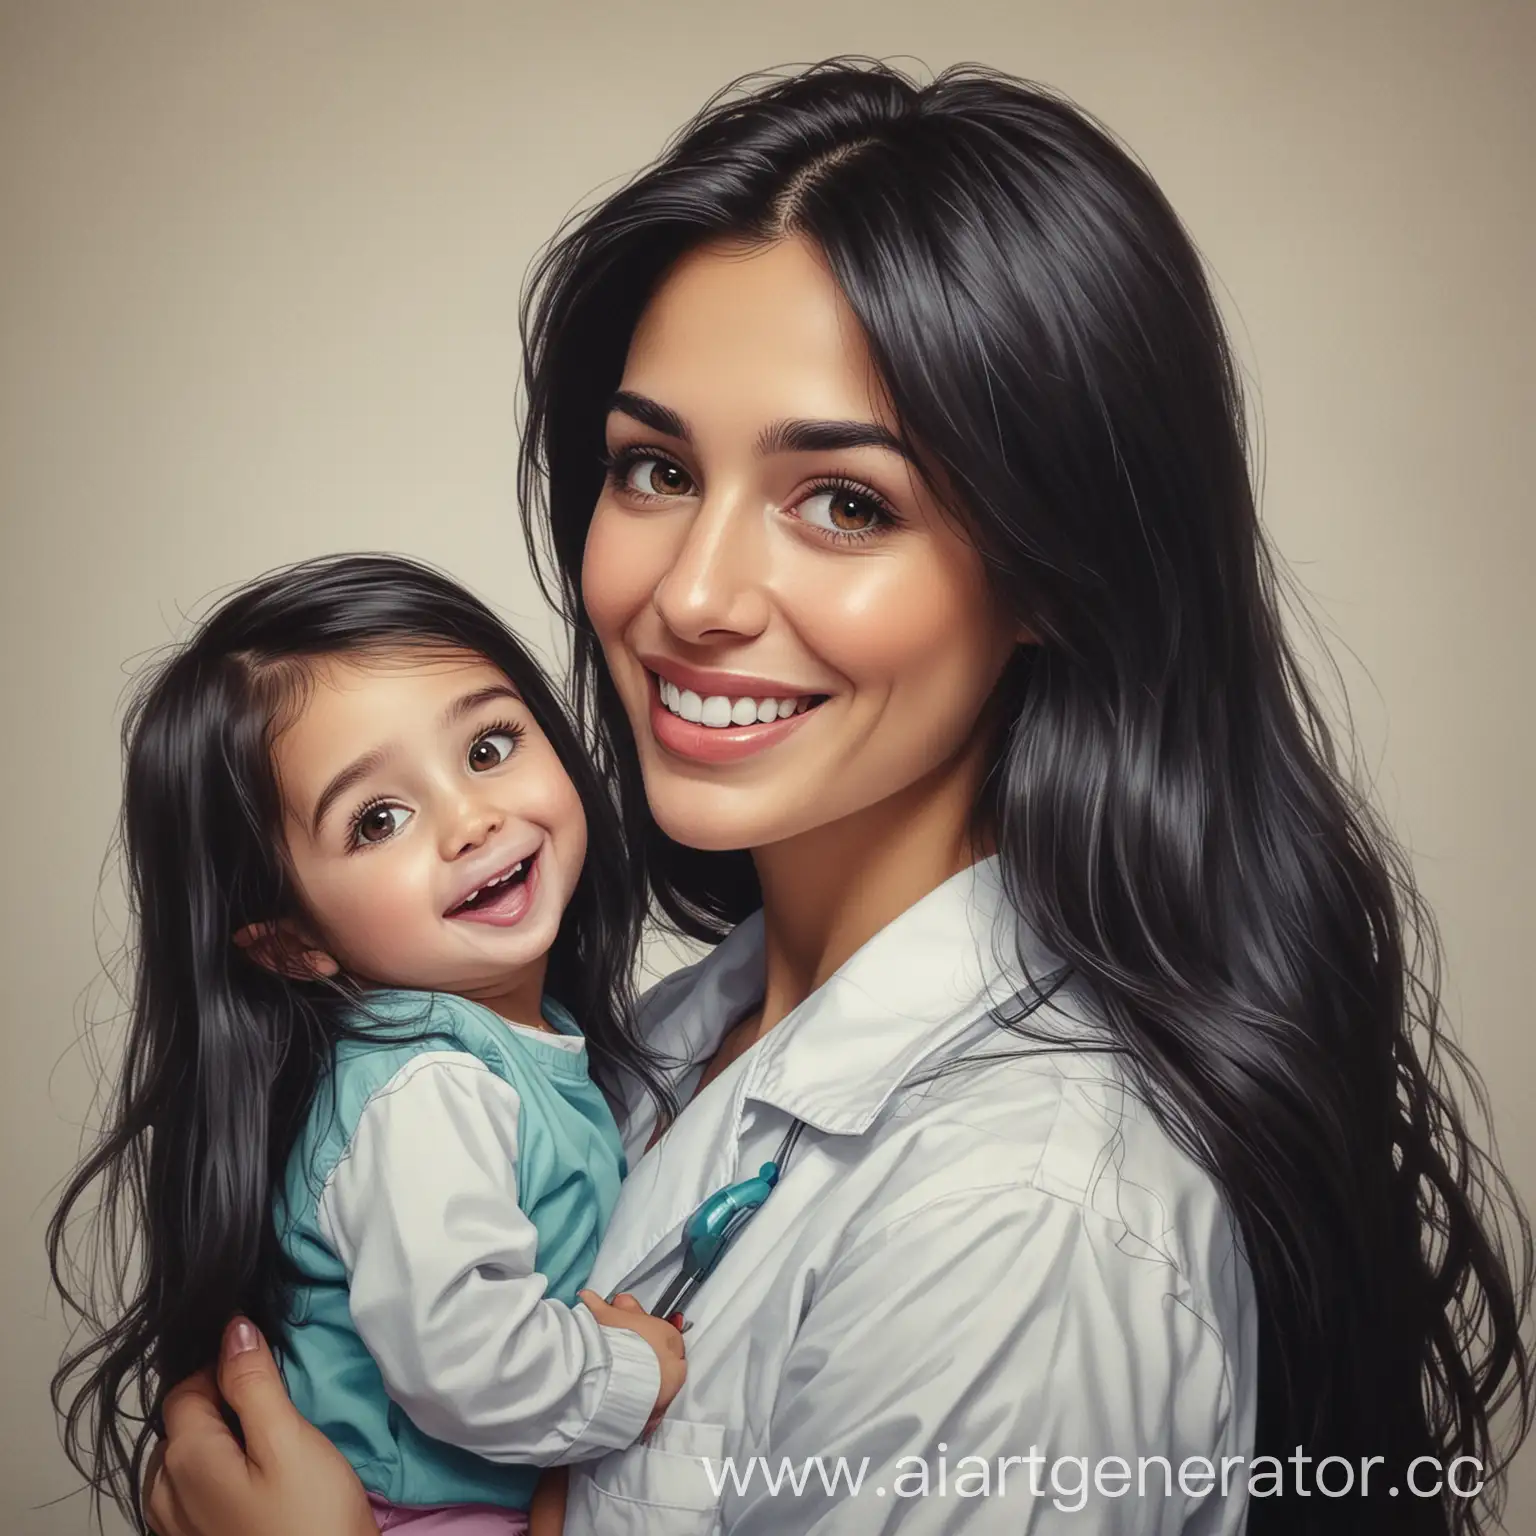 Caring-Dentist-Mother-with-Dark-Hair-and-Daughter